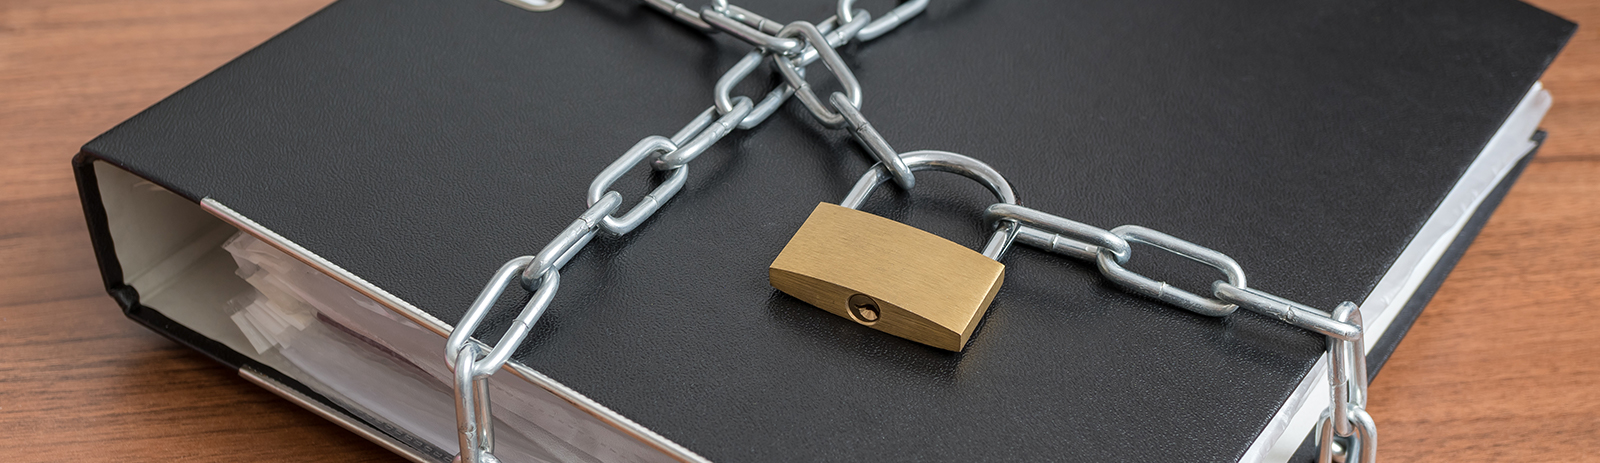 three ring binder on a table with a lock and chains